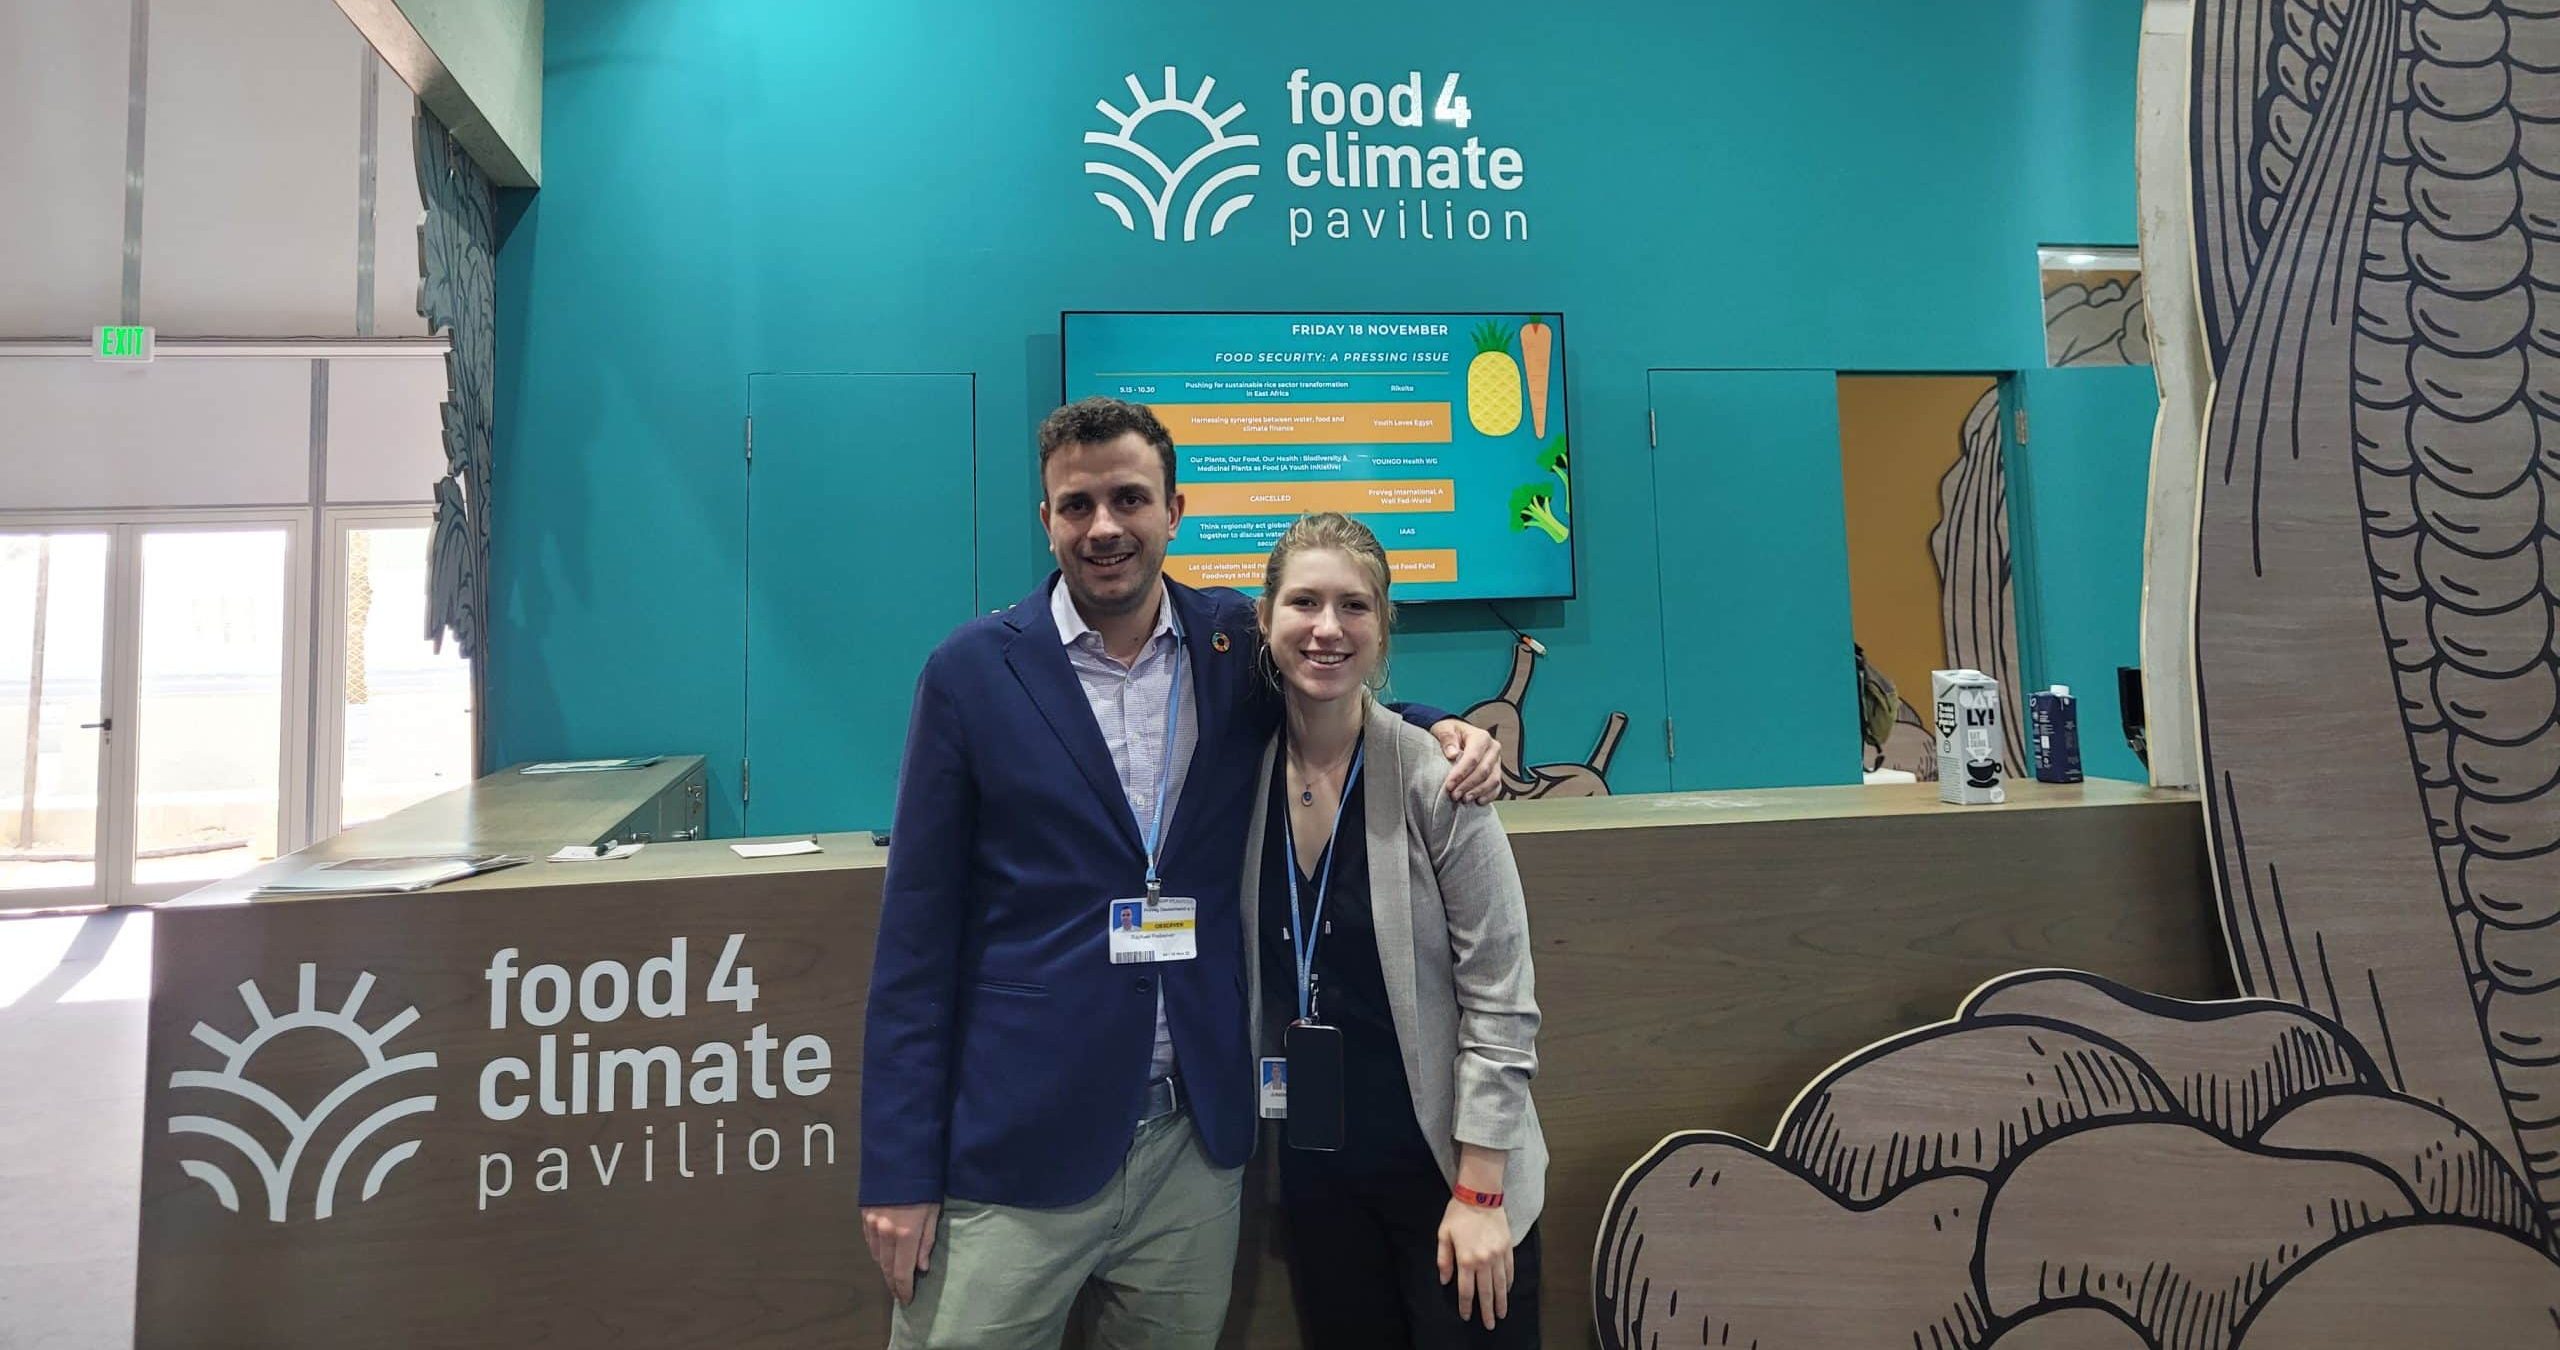 COP28: Why all the hype around the Food4Climate Pavilion?